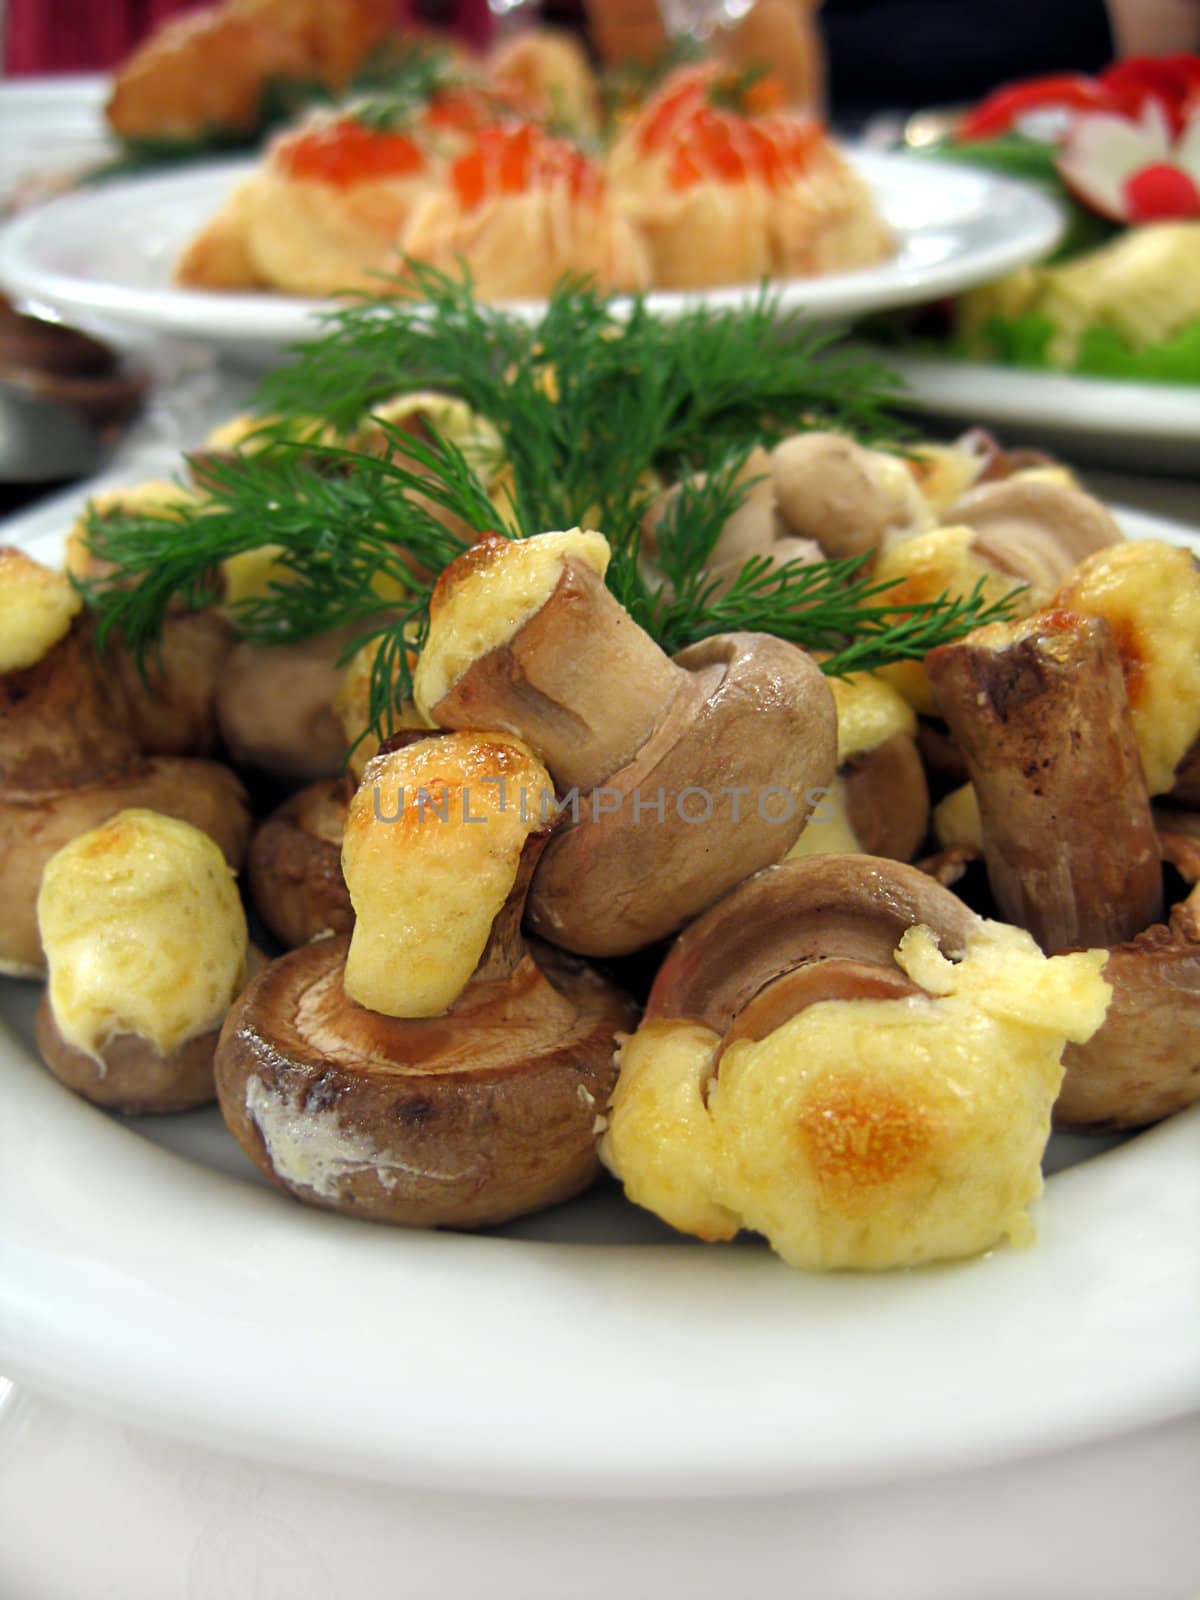 Baked mushrooms with cheese on plate